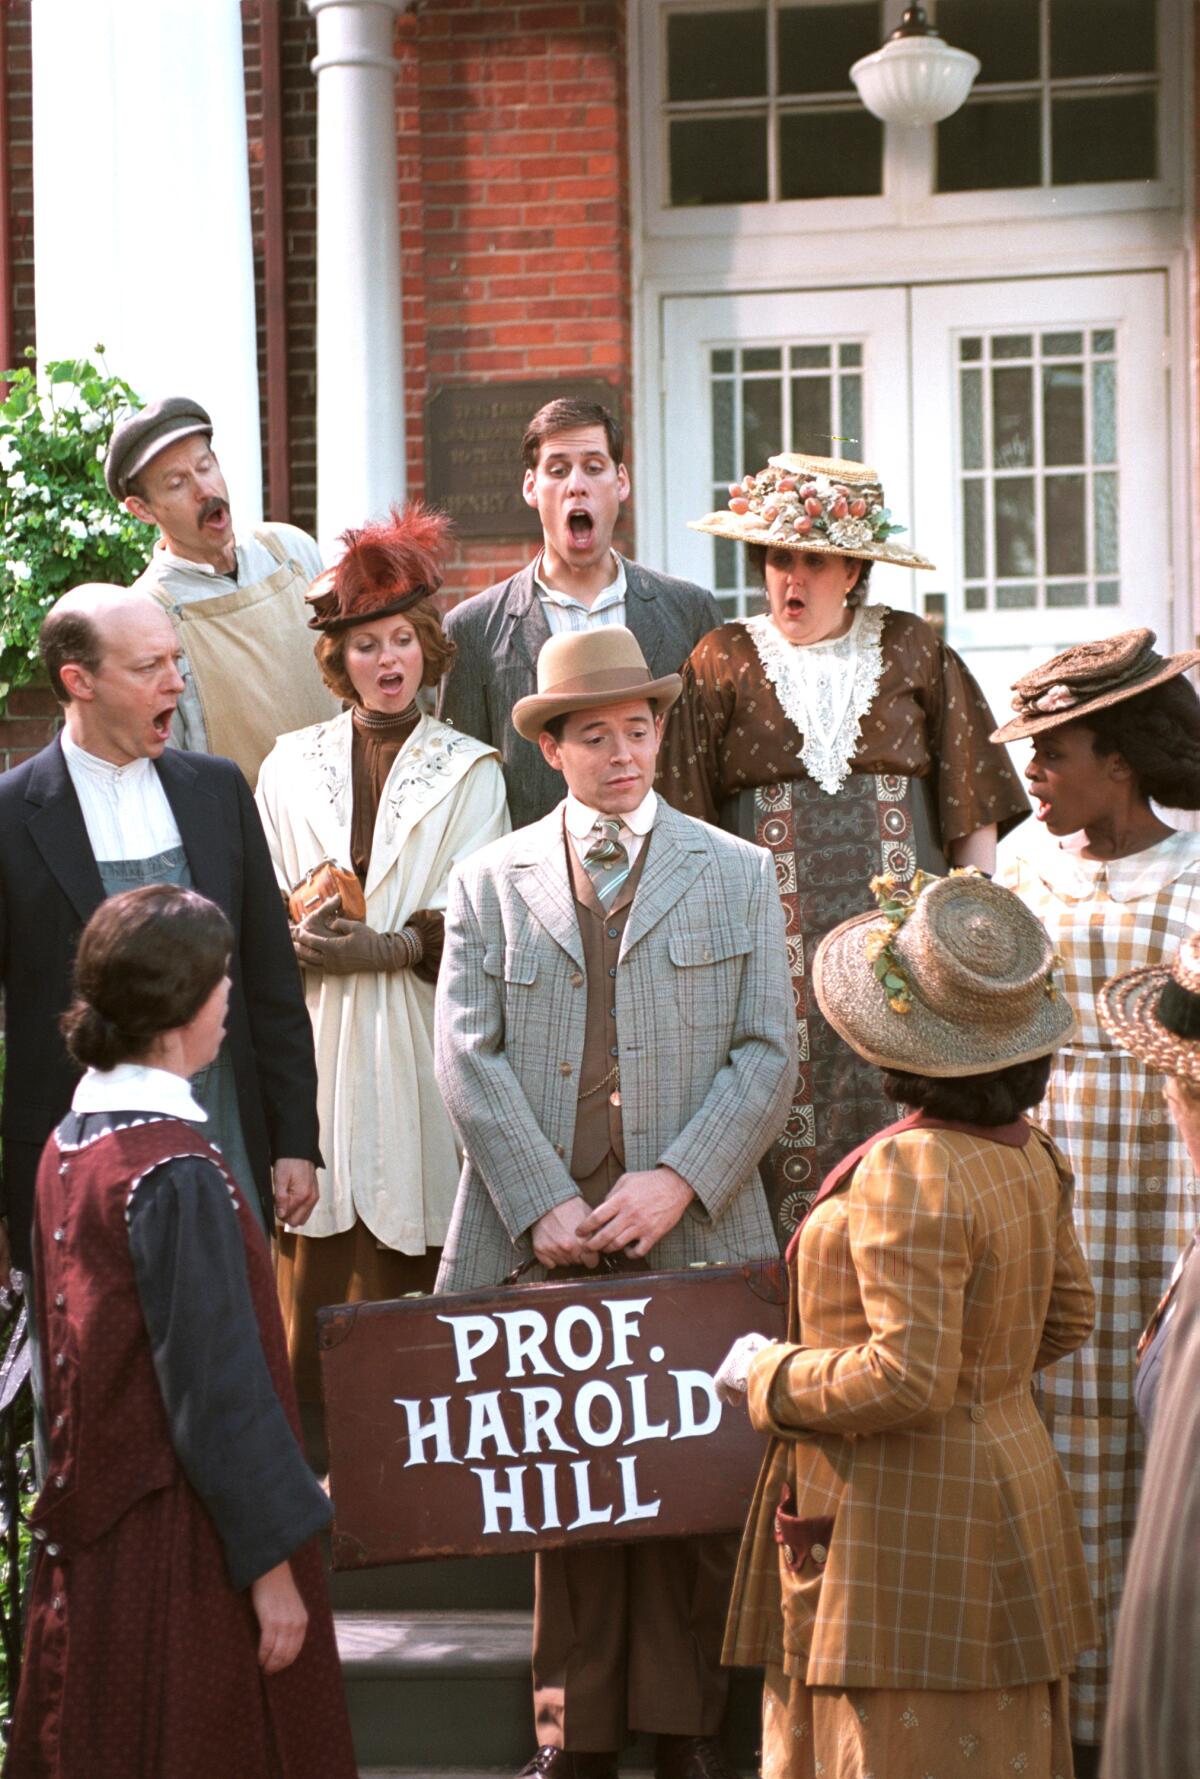 Matthew Broderick, in costume and holding a suitcase labeled "Prof. Harold Hill," is surrounded by singing men and women.